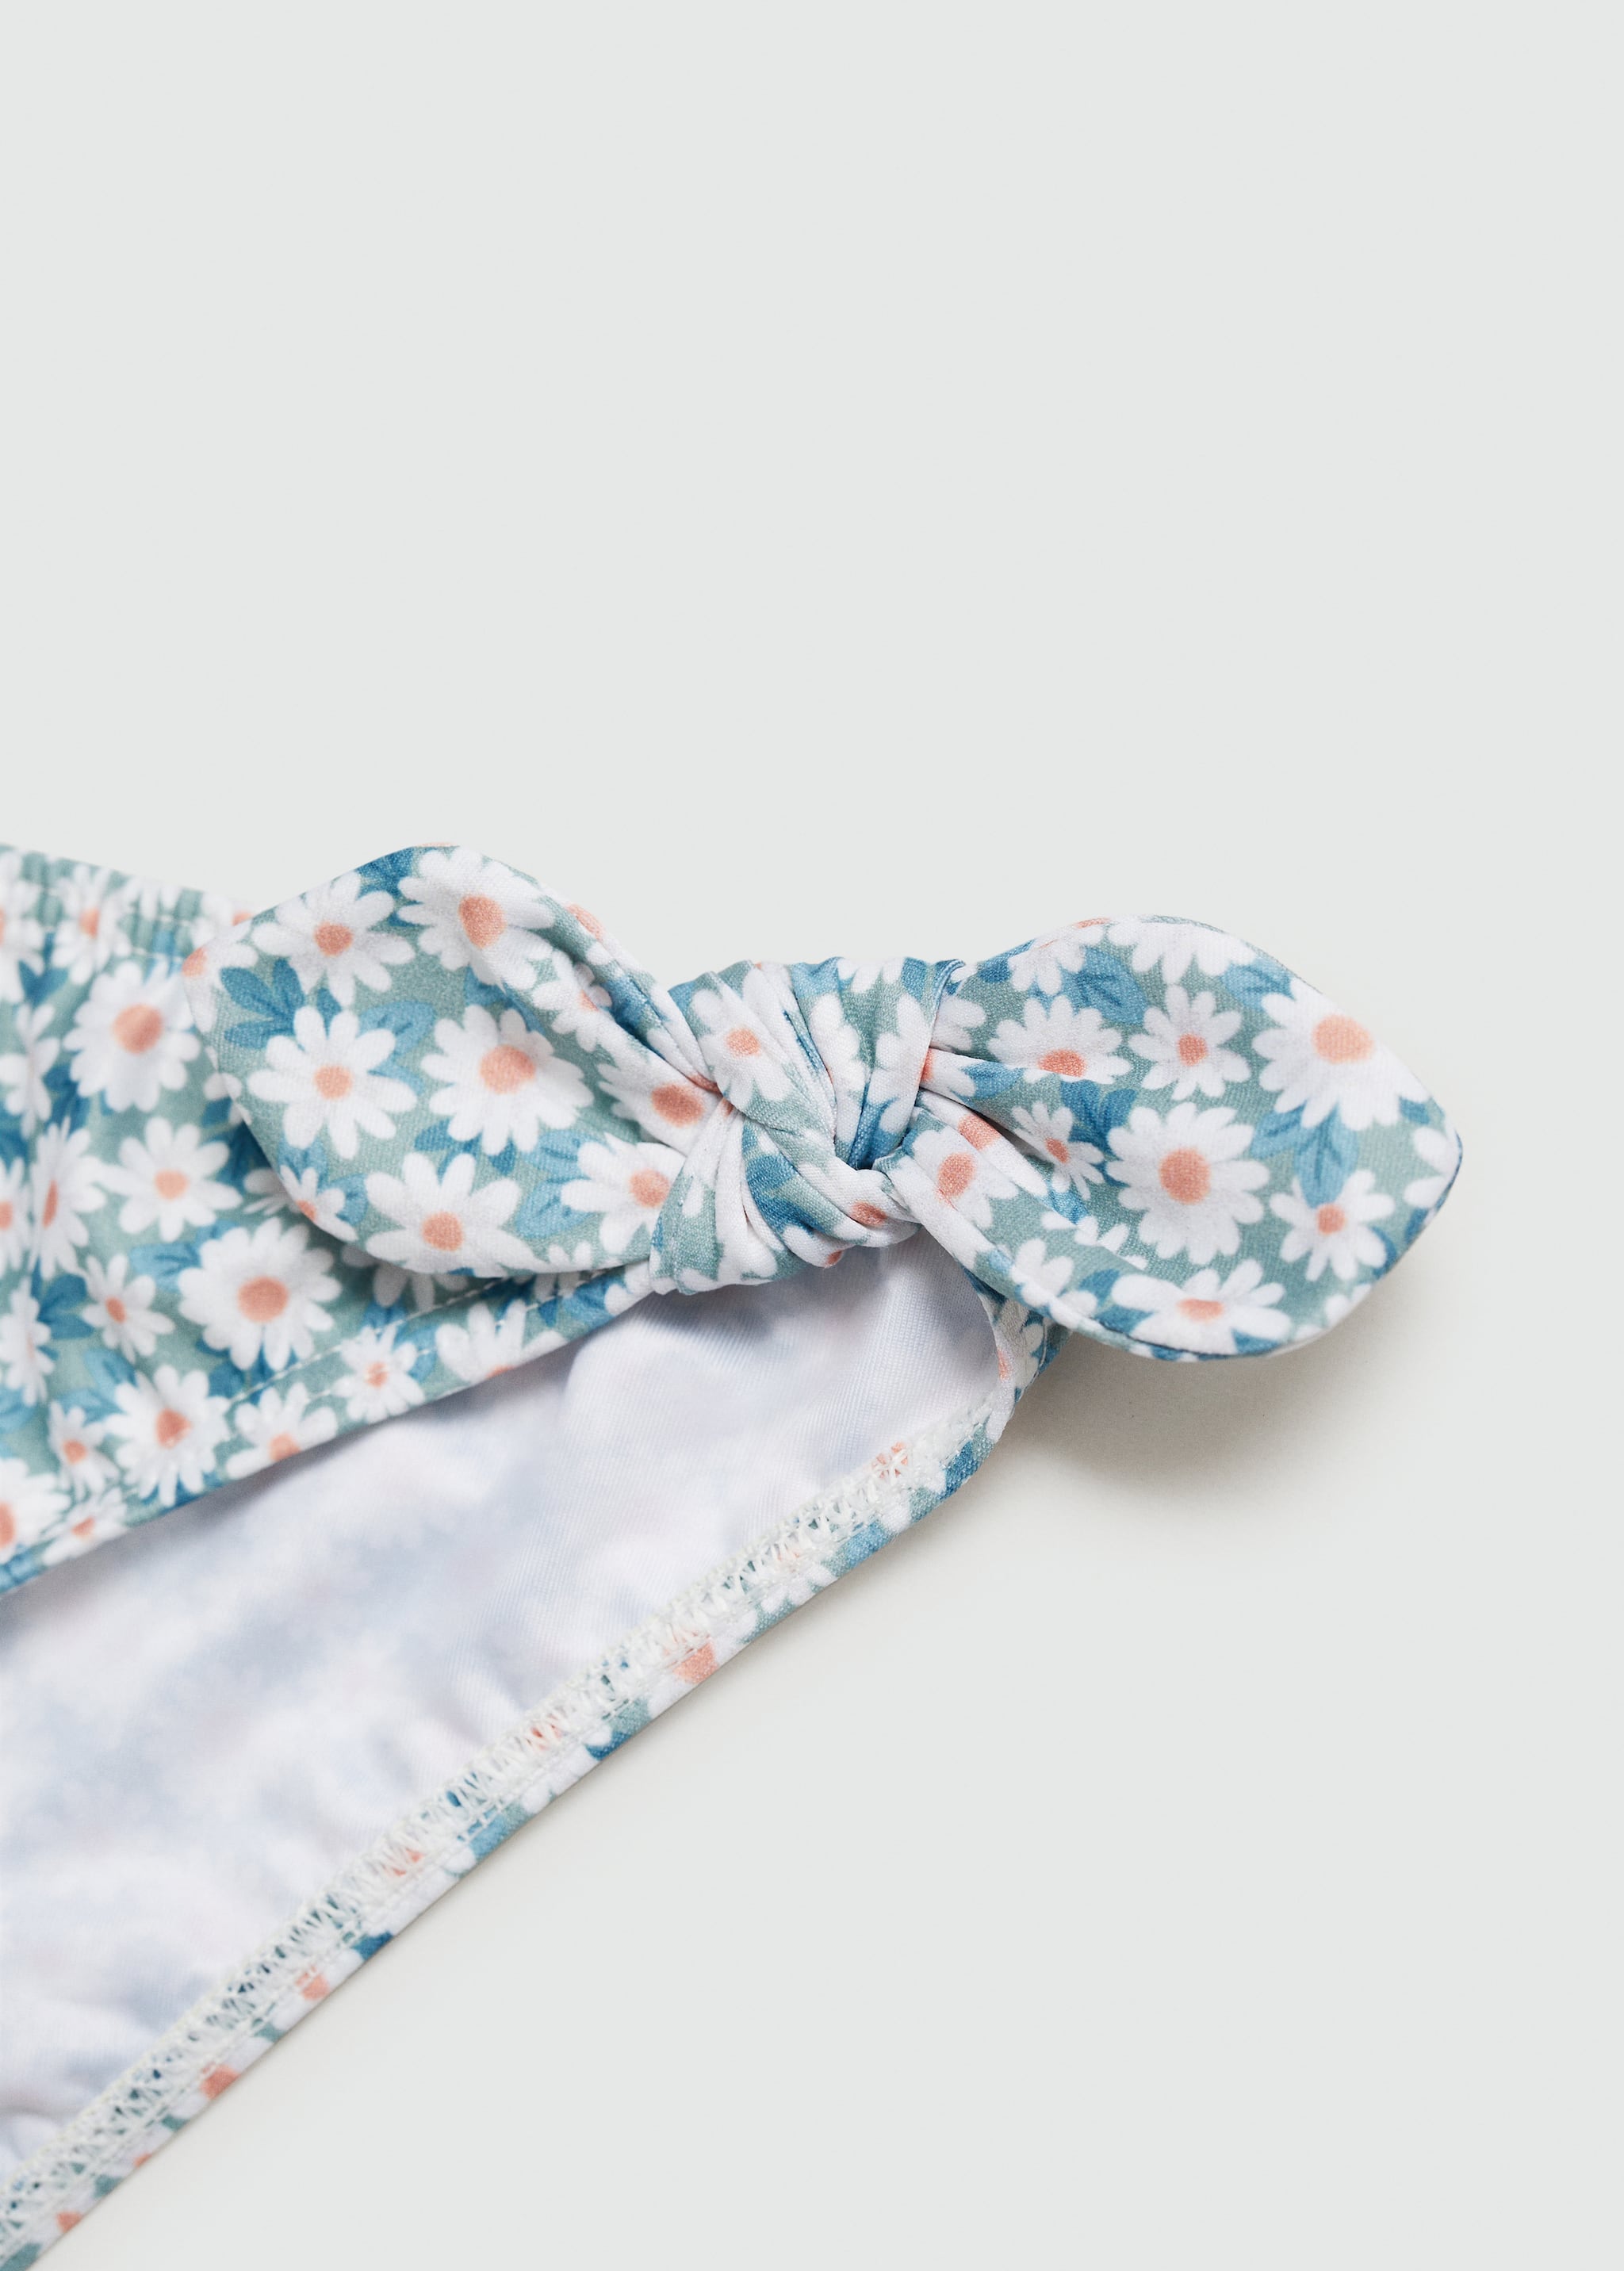 Floral print bikini - Details of the article 0